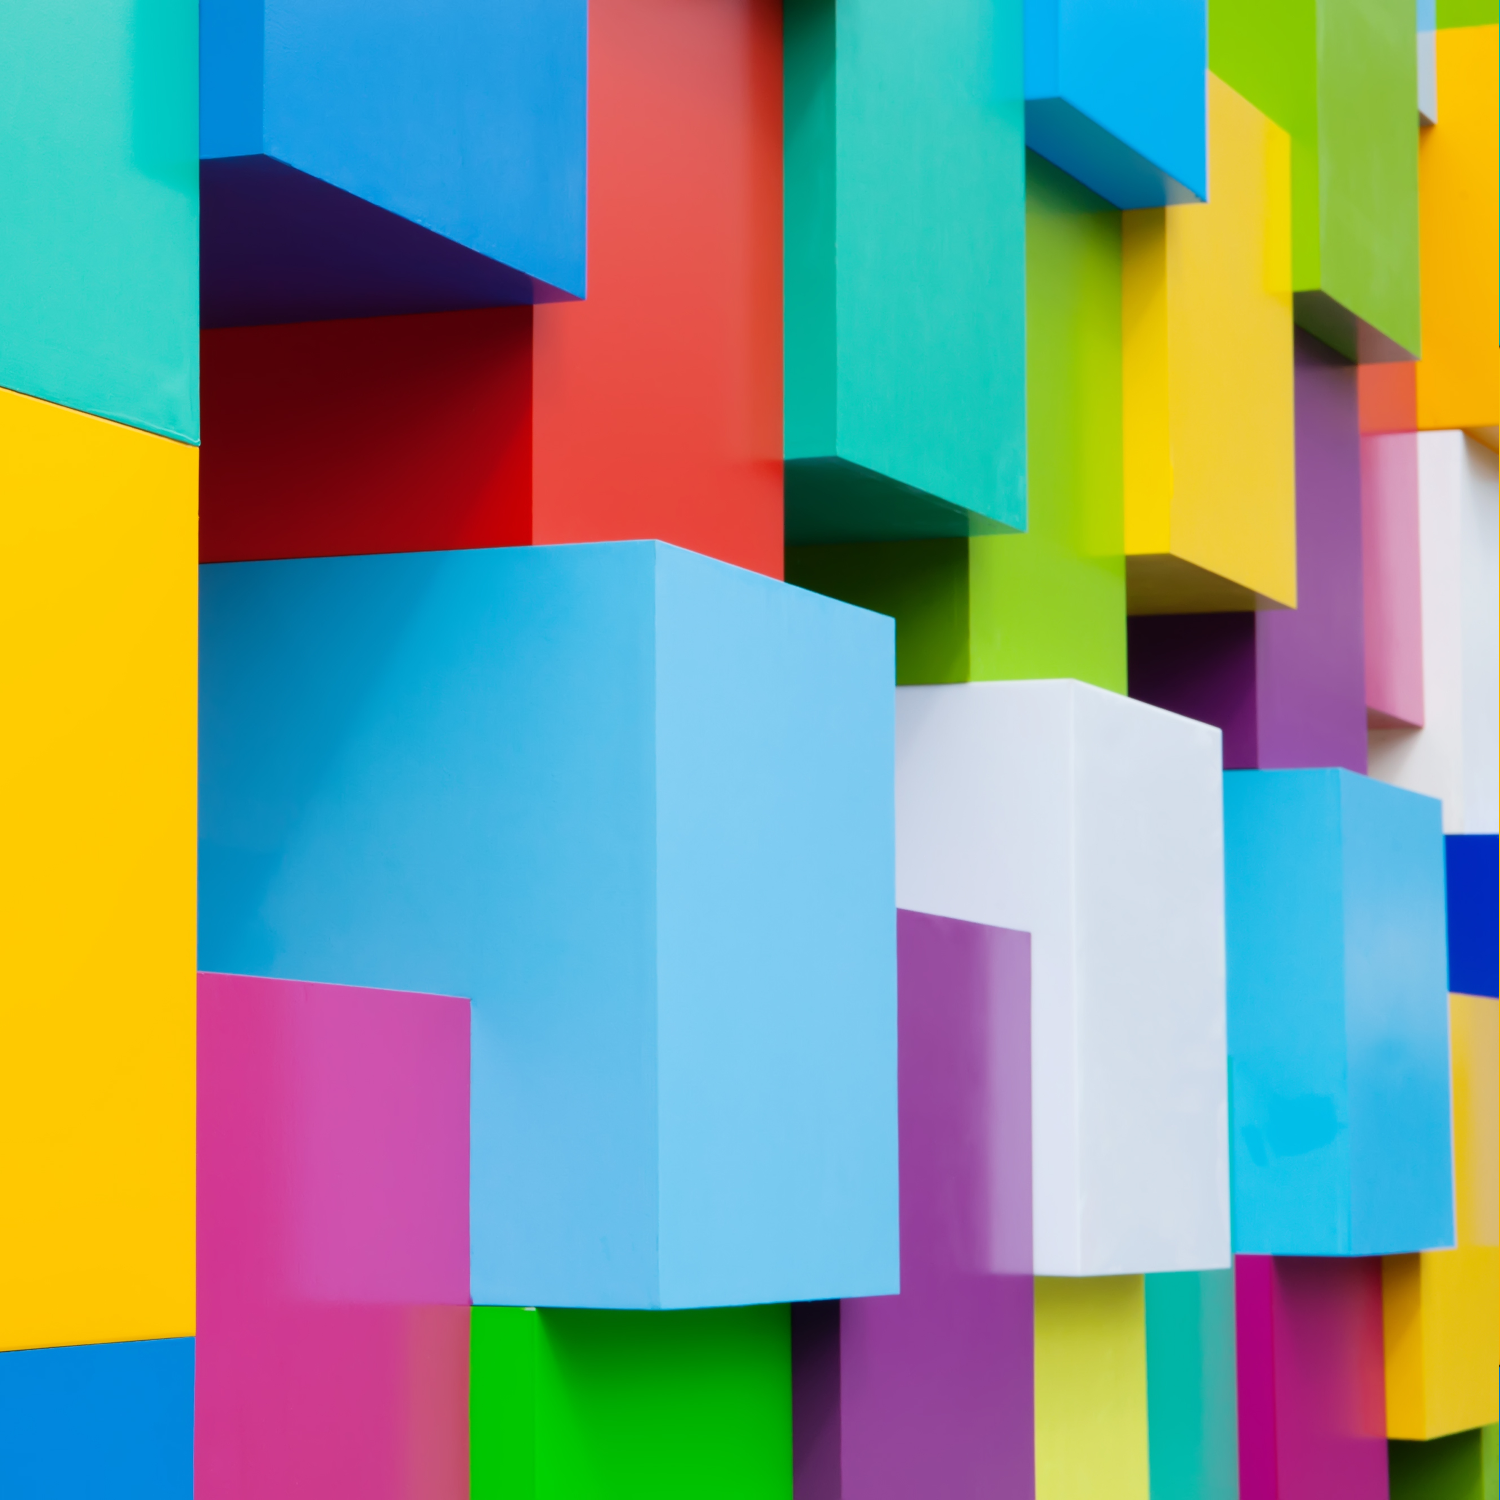 A structure composed of colorful building blocks.